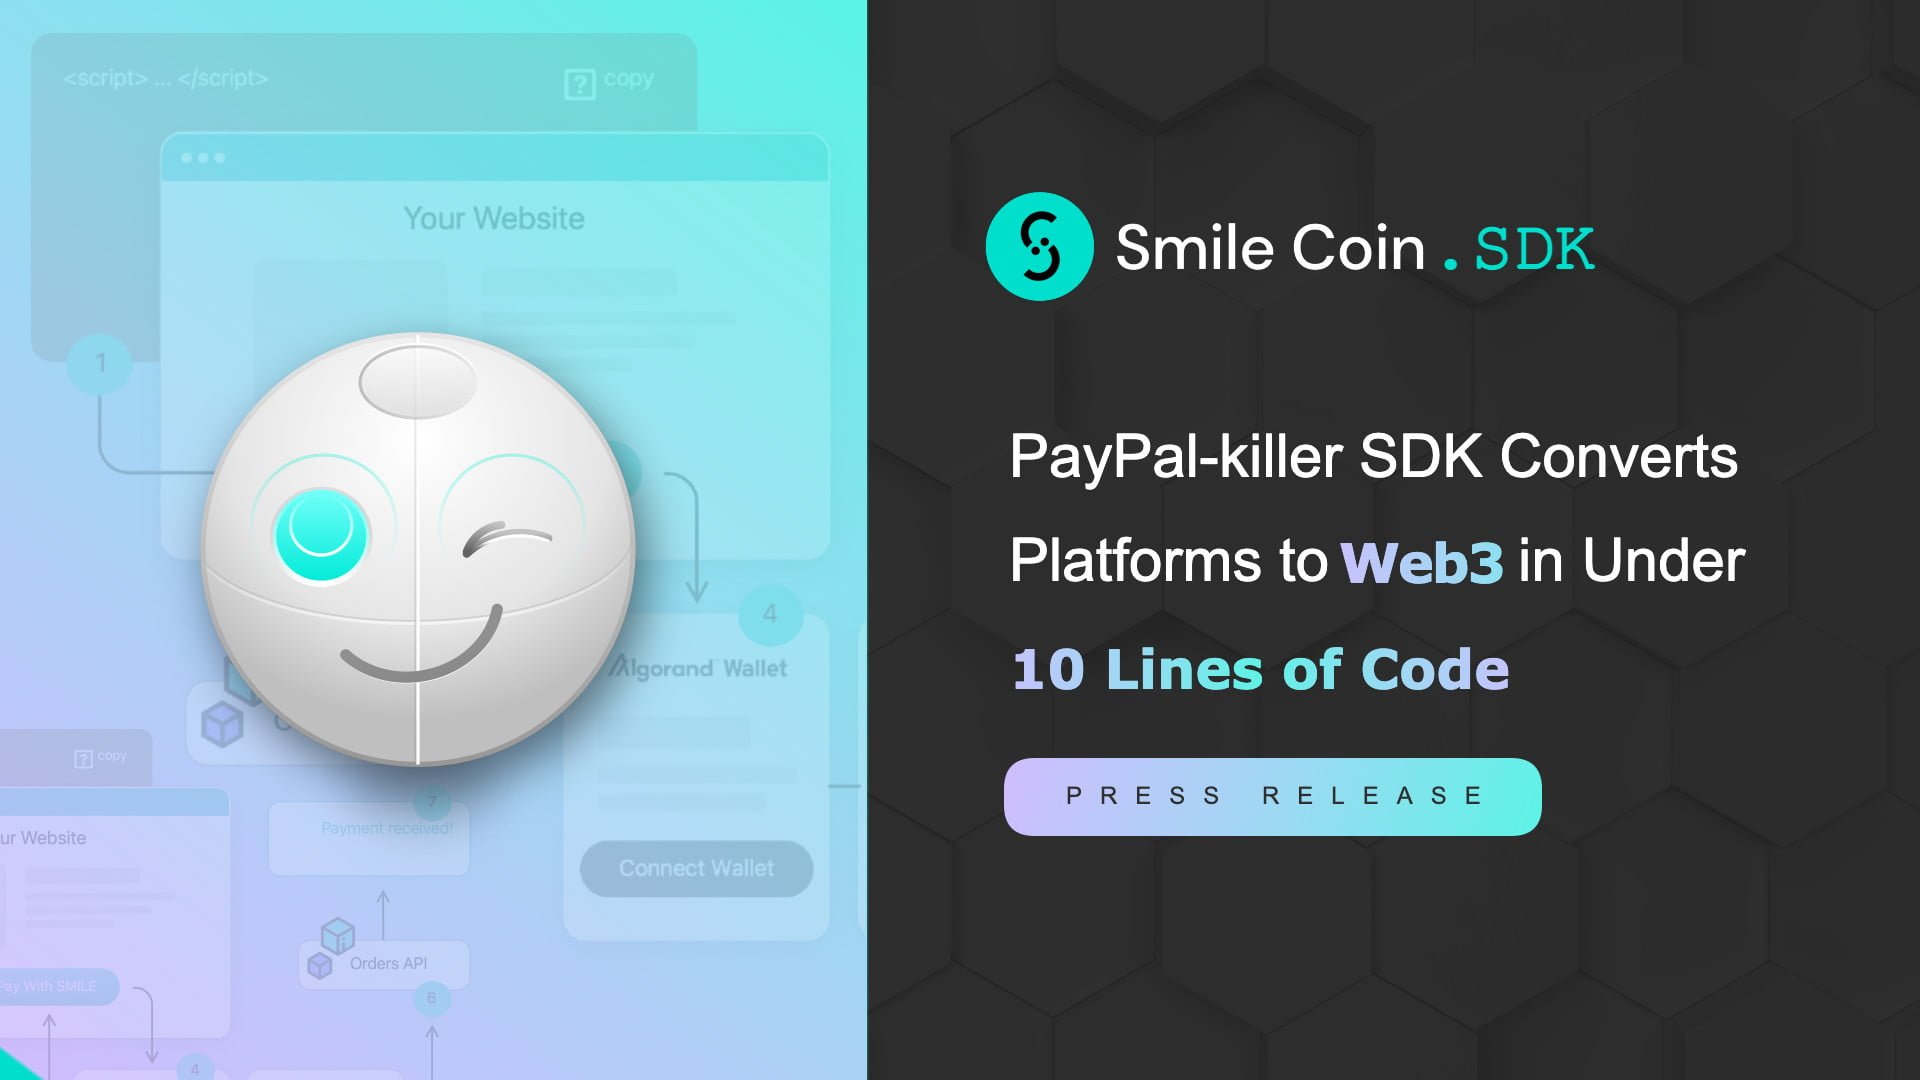 PayPal-killer SDK Converts Platforms to Web3 in 10 Lines of Code 14